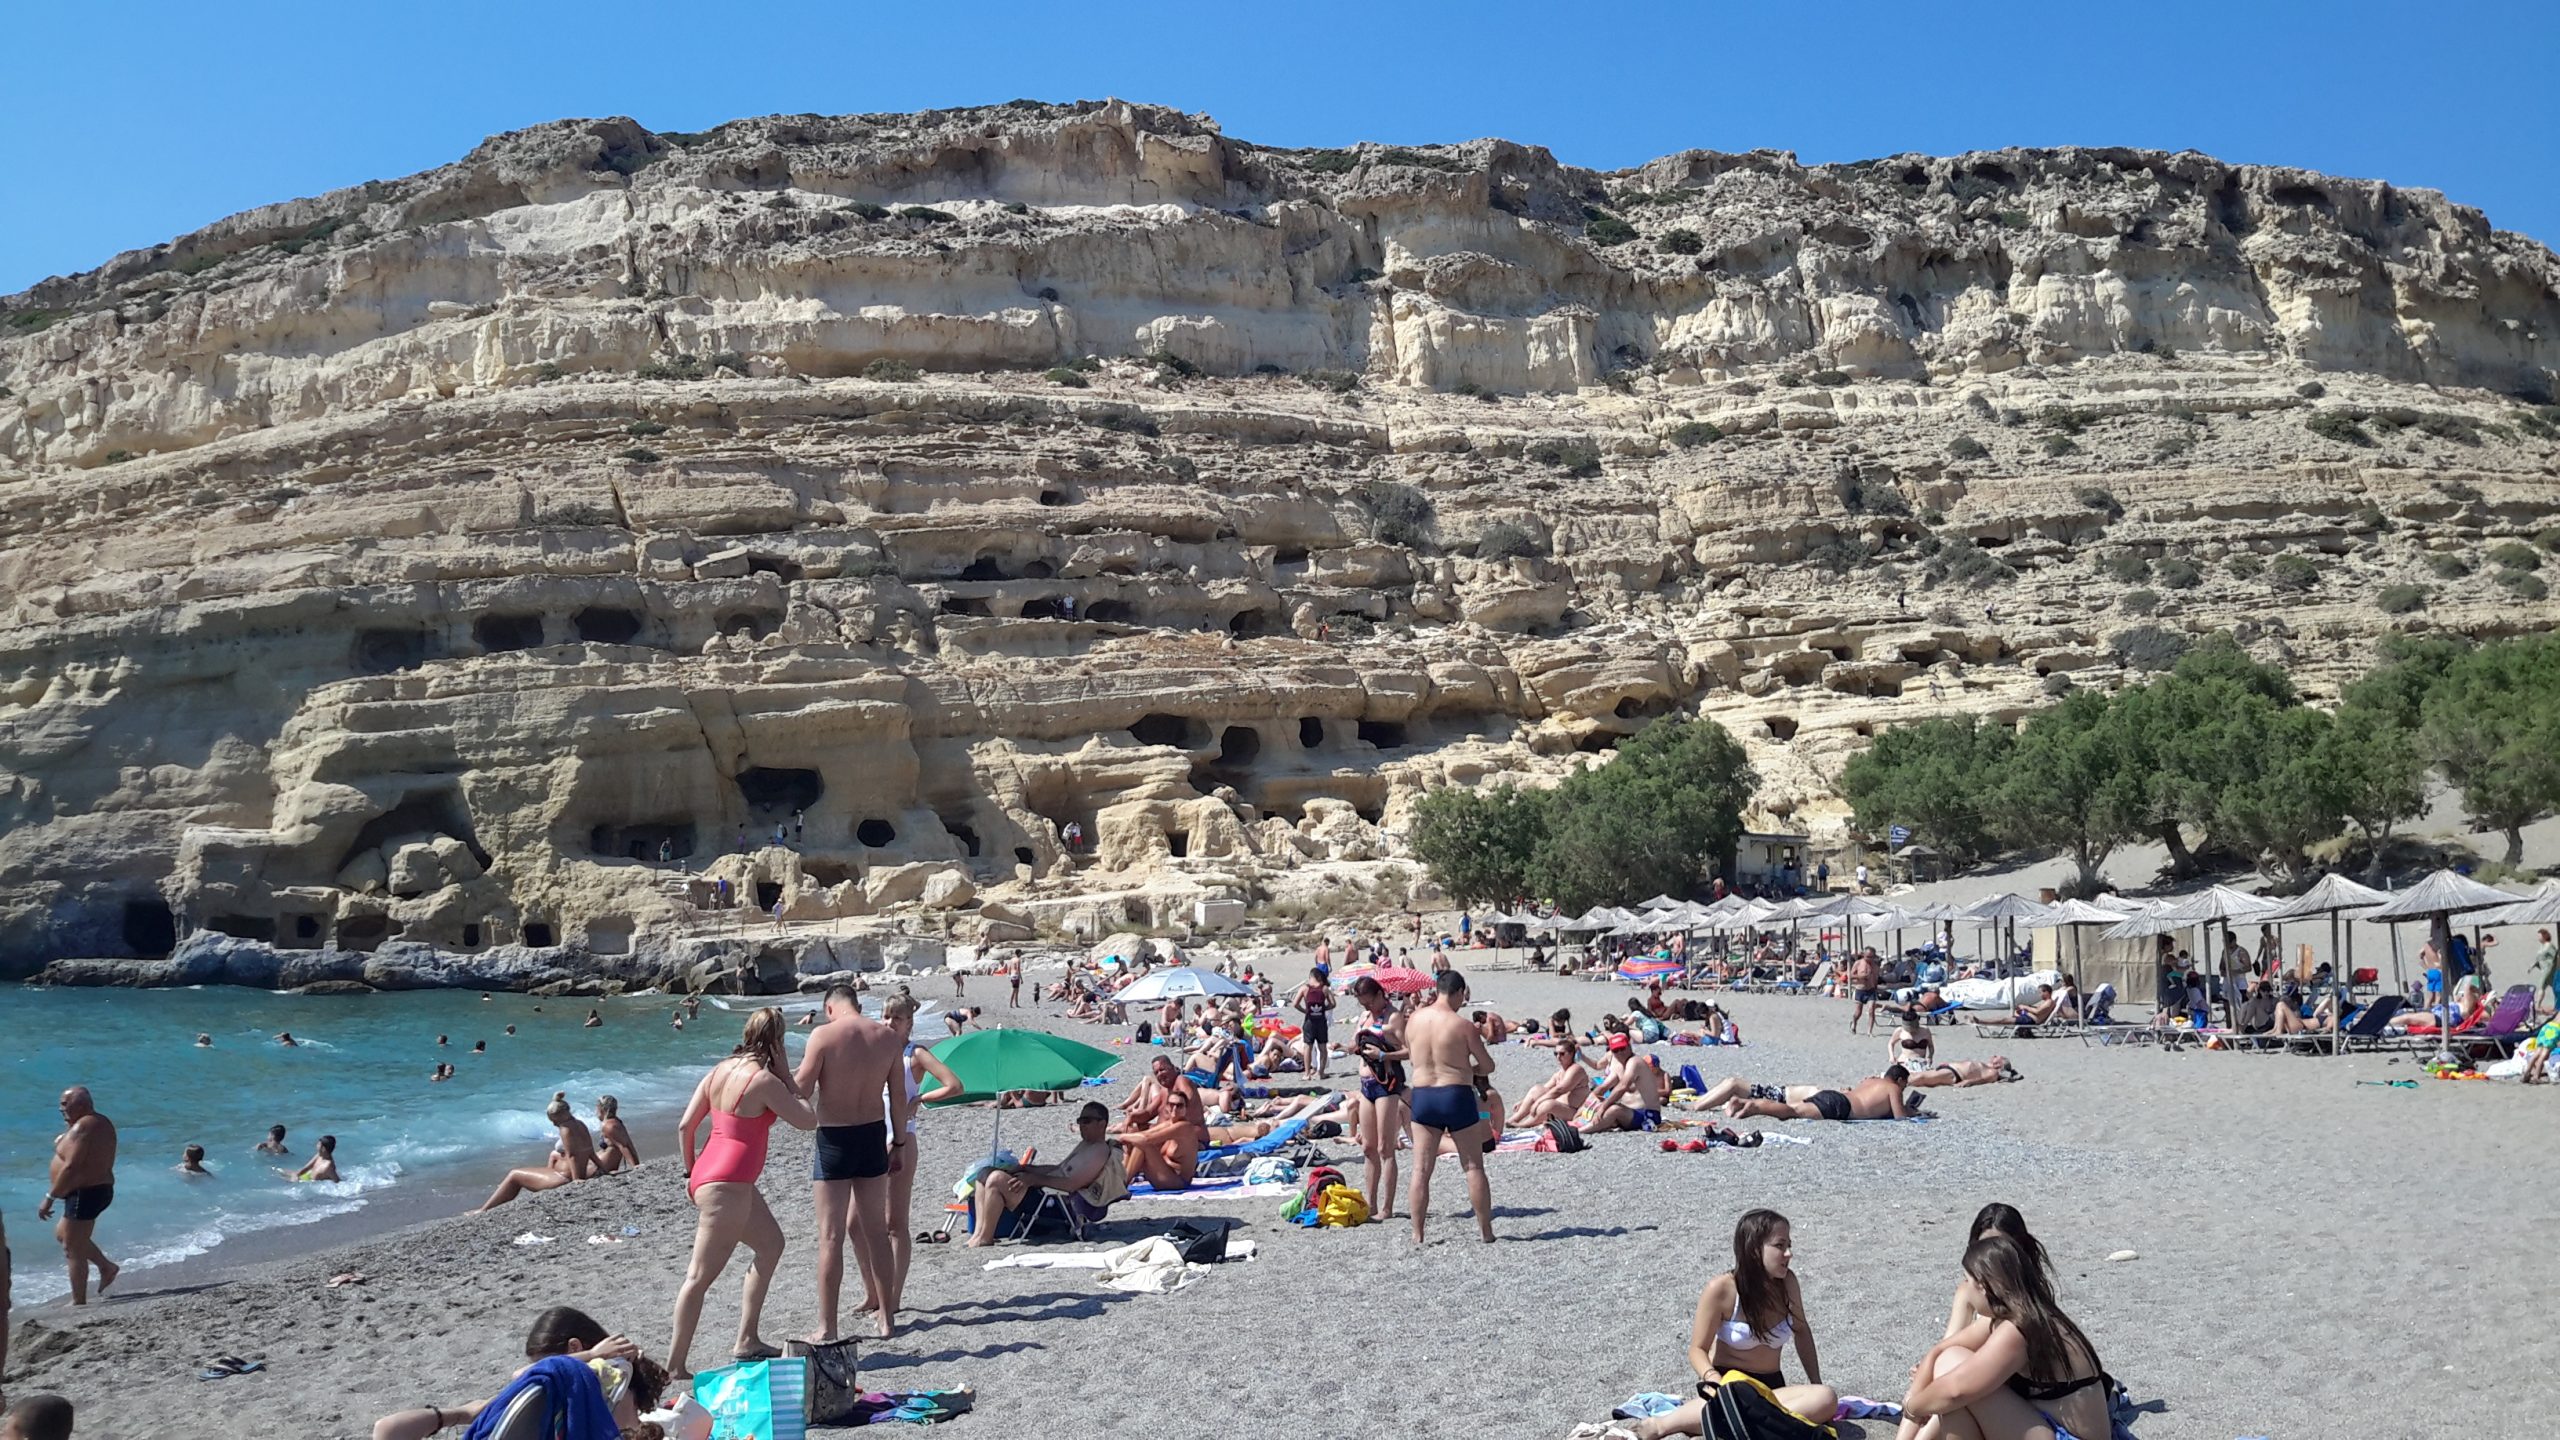 Beautiful Matala, Crete. Sand caves where Hippies lived in the 60's & early 70's